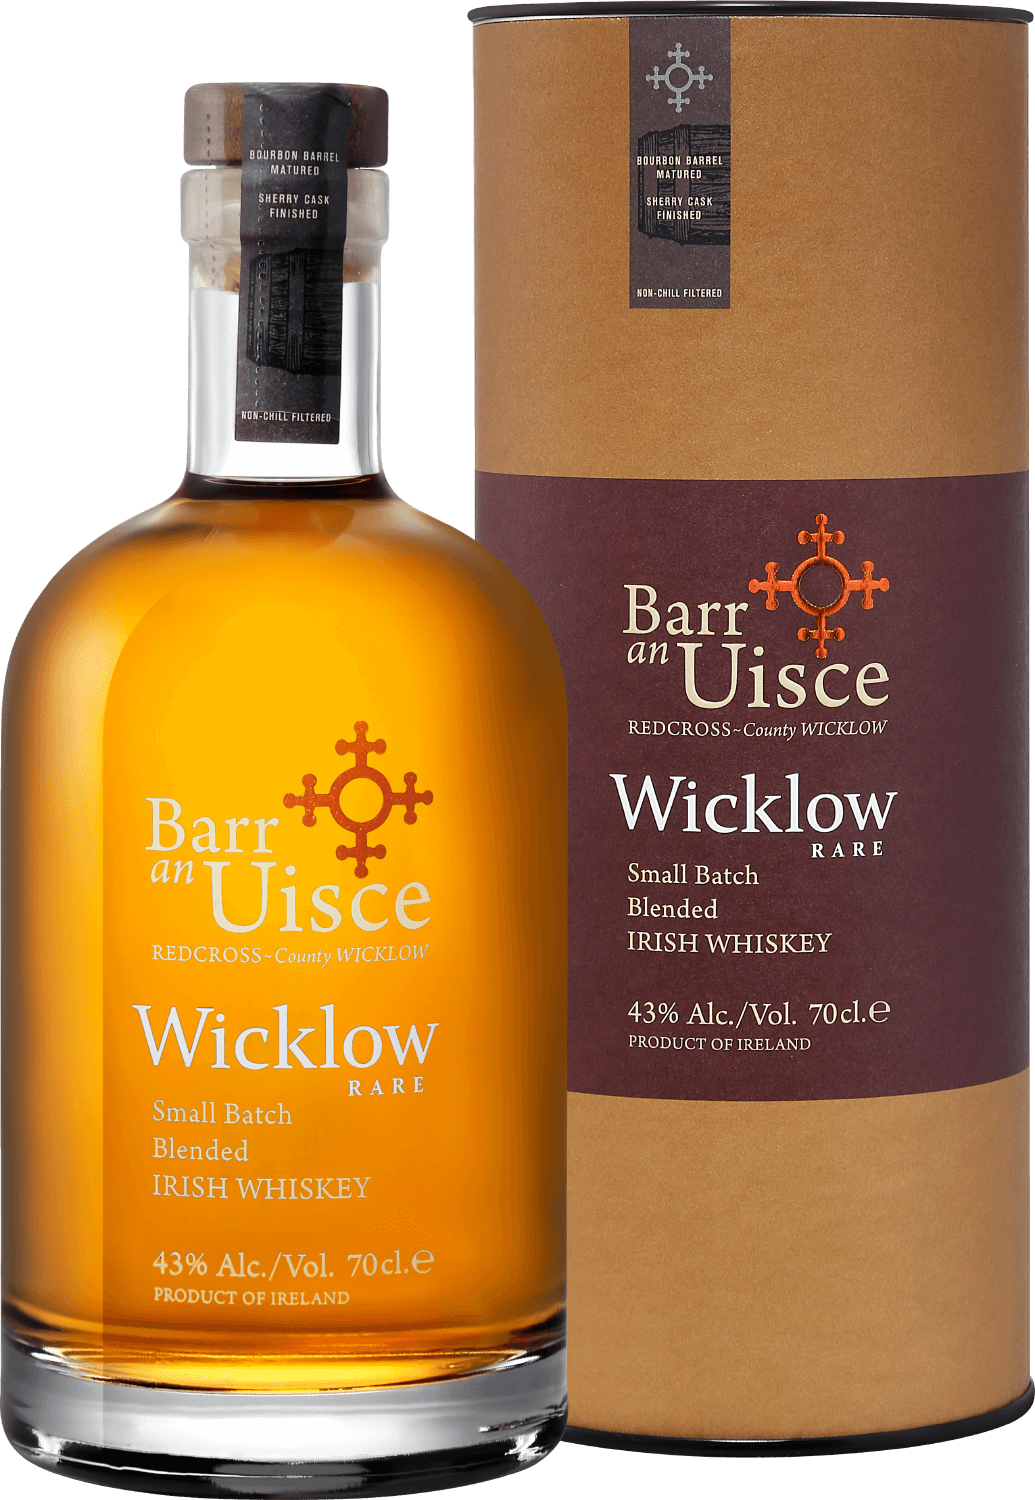 Barr an Uisce Wicklow Rare Small Batch Blended Irish Whiskey 4 YO (gift box) hinch small batch blended irish whisky